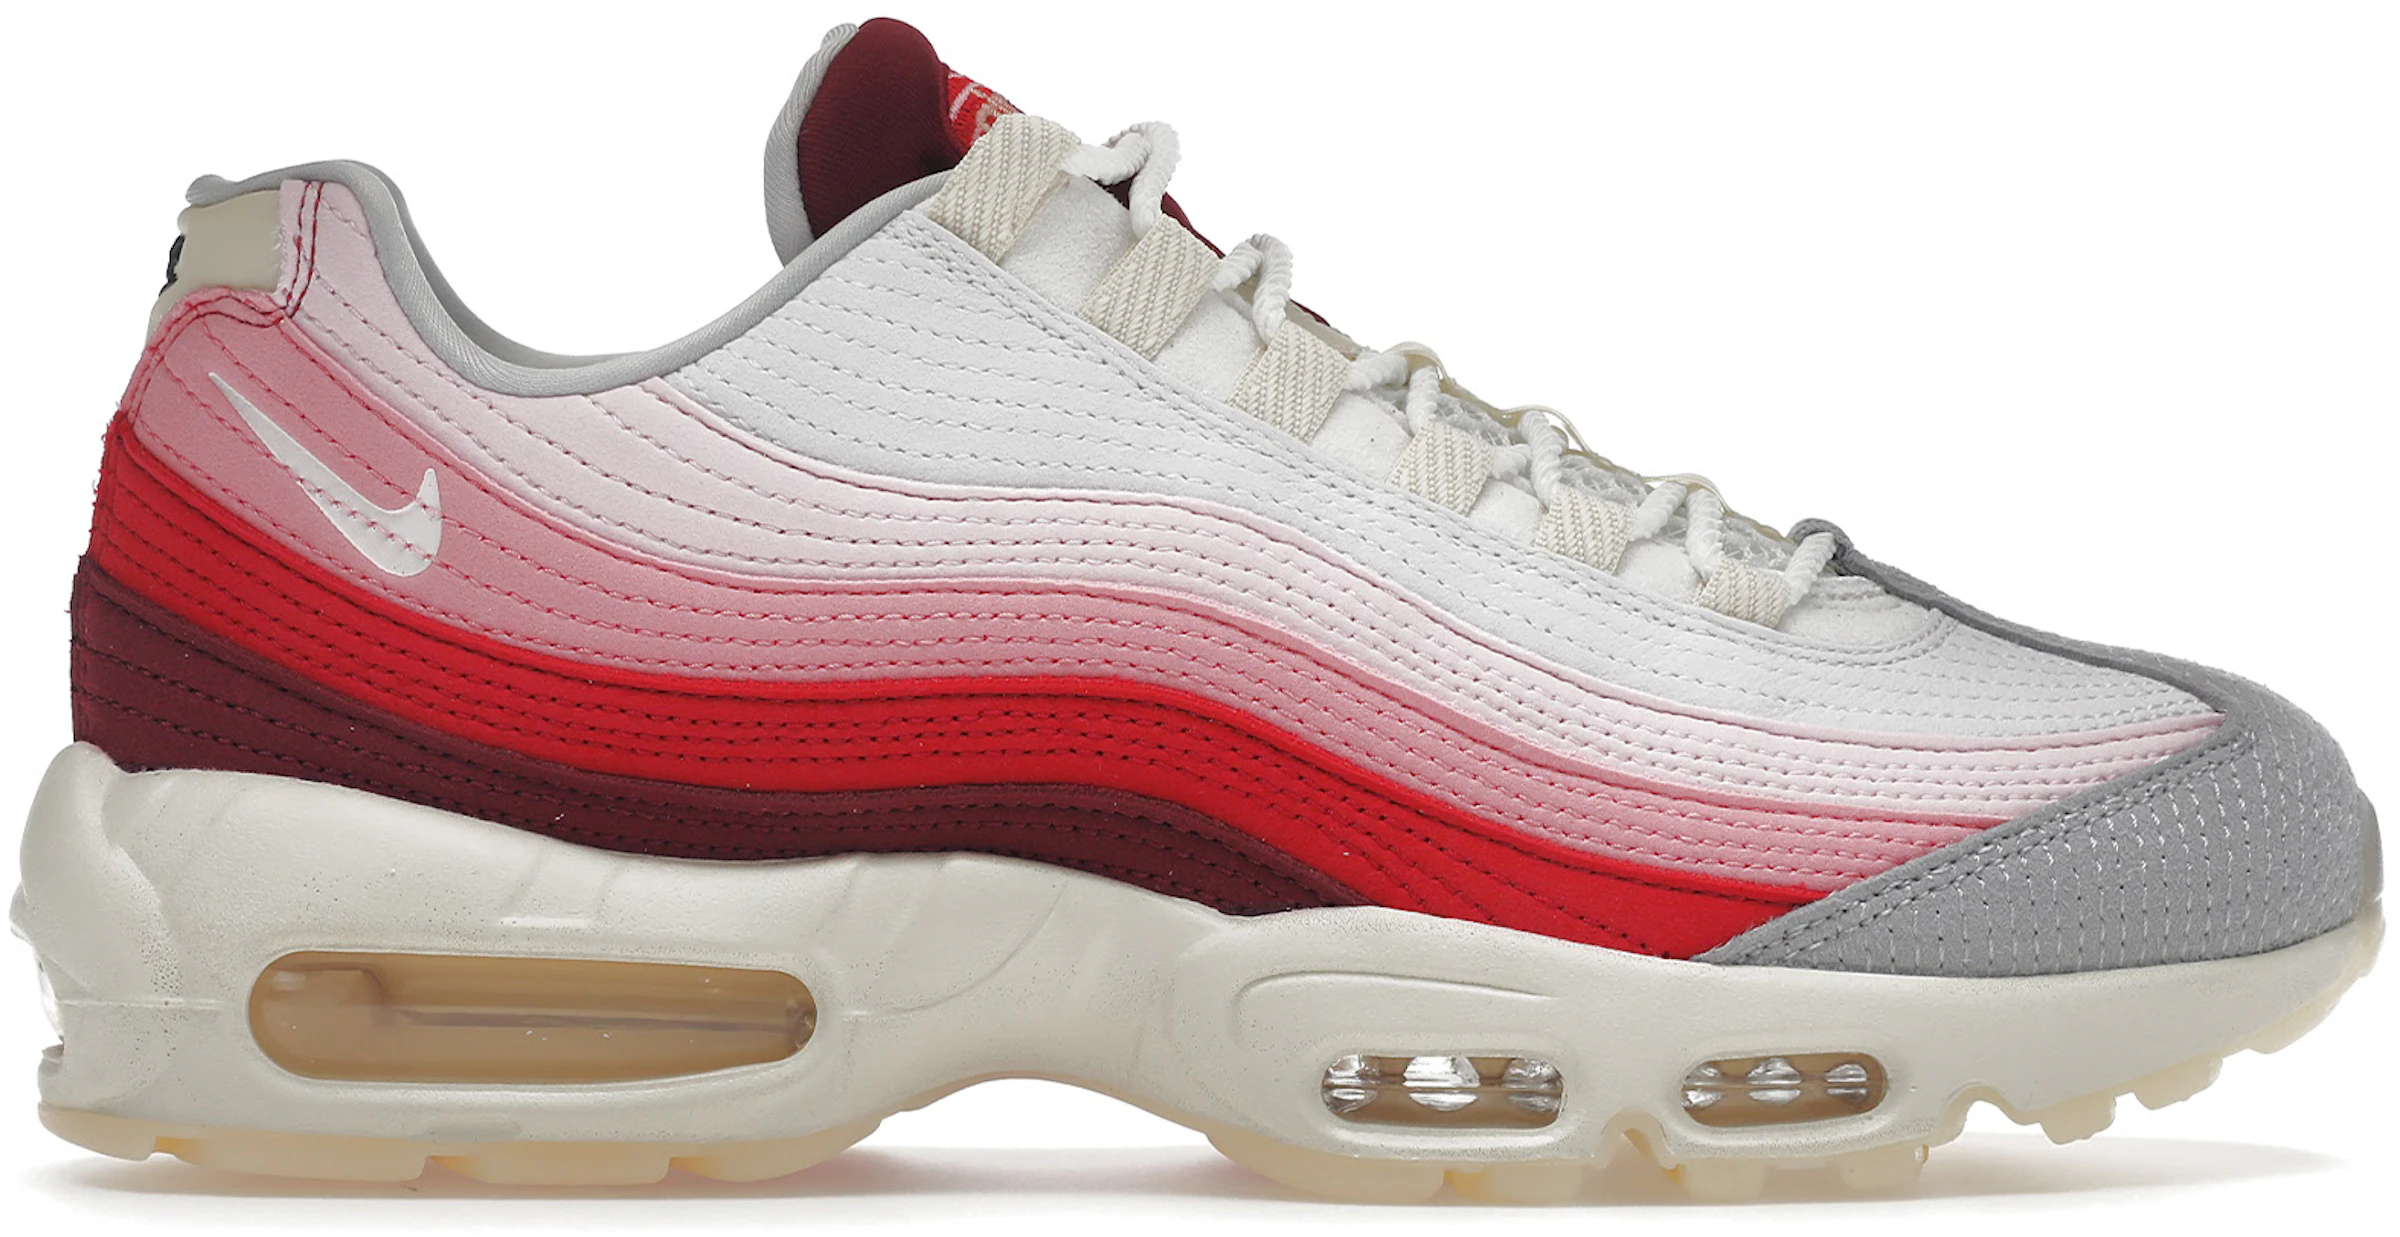 Buy Nike Air Max 95 Shoes & New - StockX